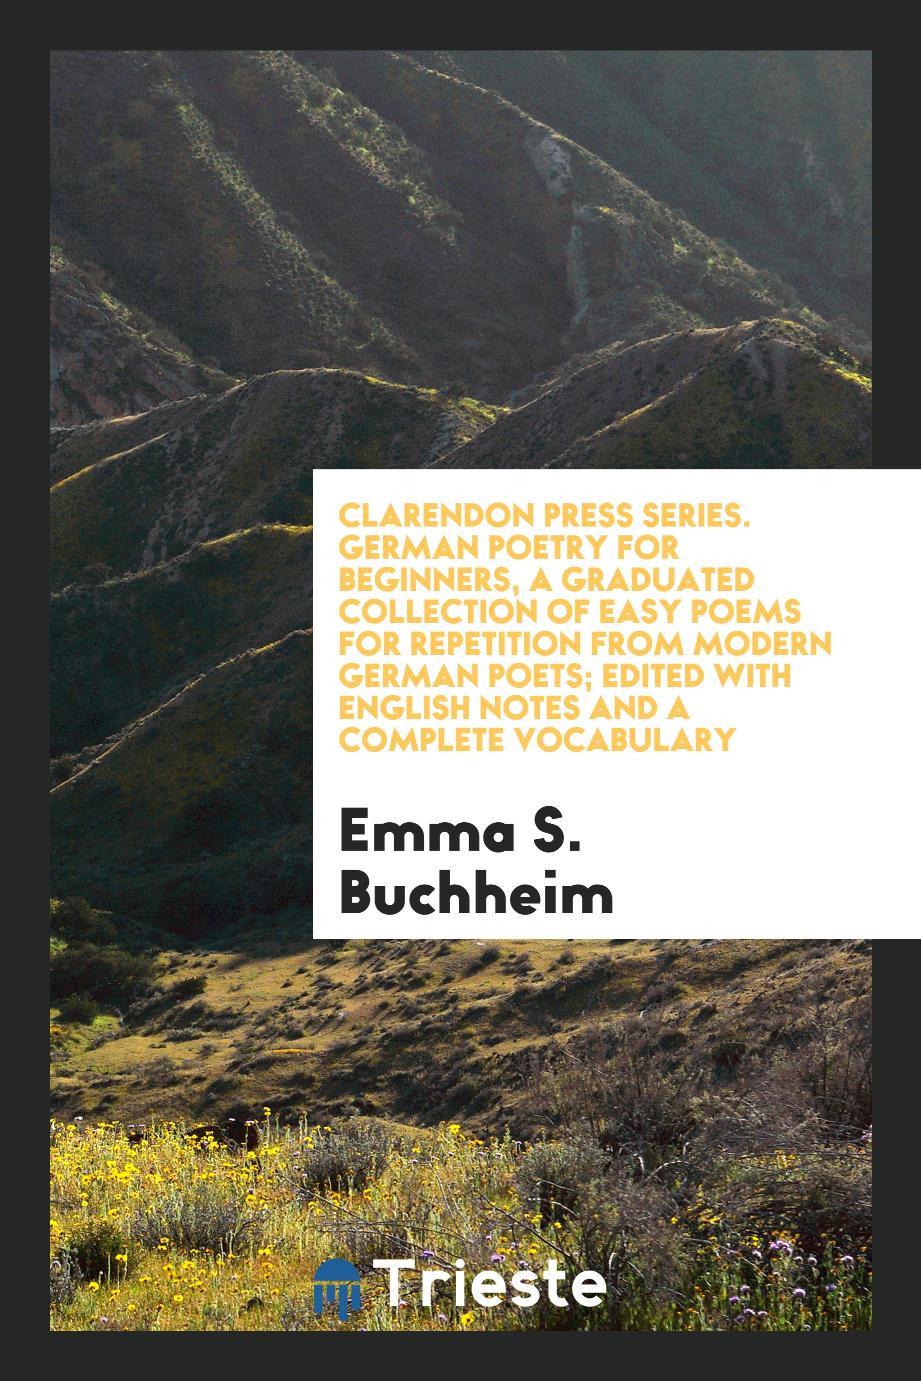 Clarendon Press Series. German Poetry for Beginners, a Graduated Collection of Easy Poems for Repetition from Modern German Poets; Edited with English Notes and a Complete Vocabulary